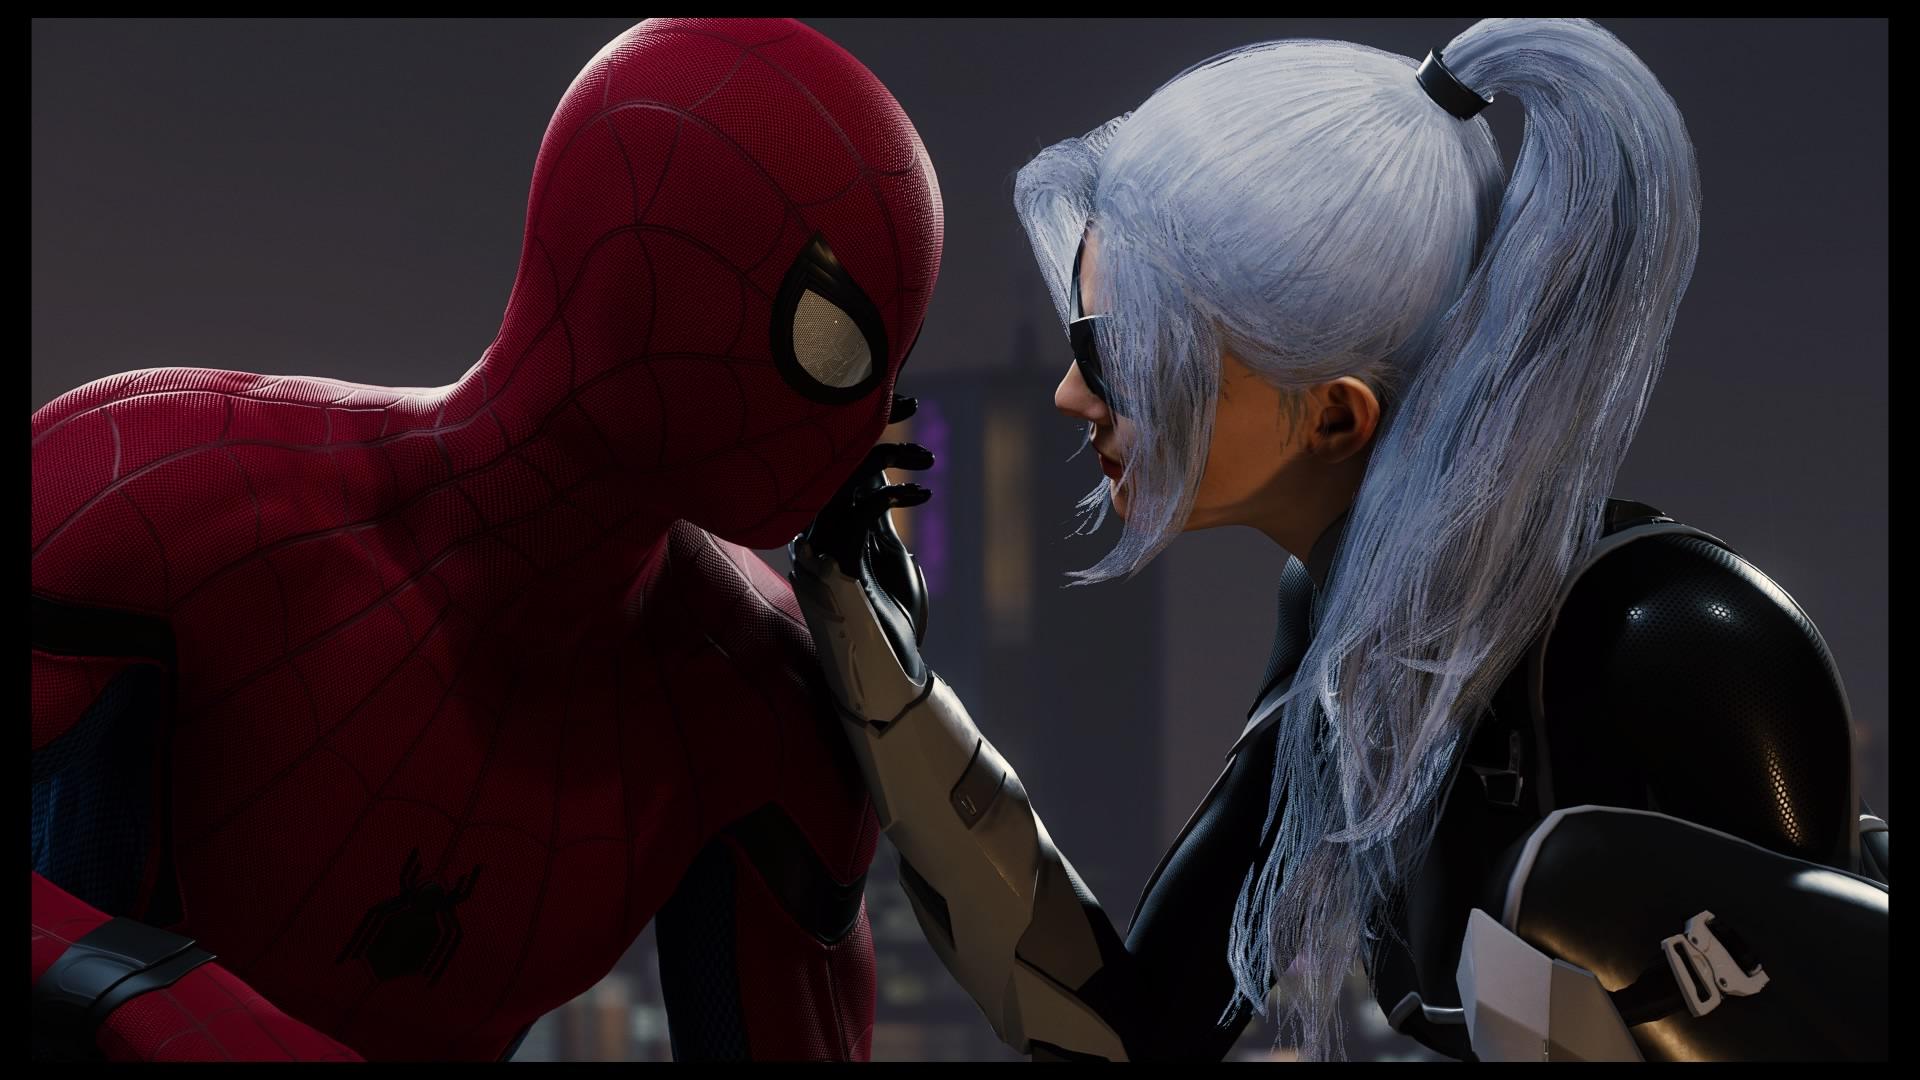 Insomniac absolutely nailed the interaction between Black